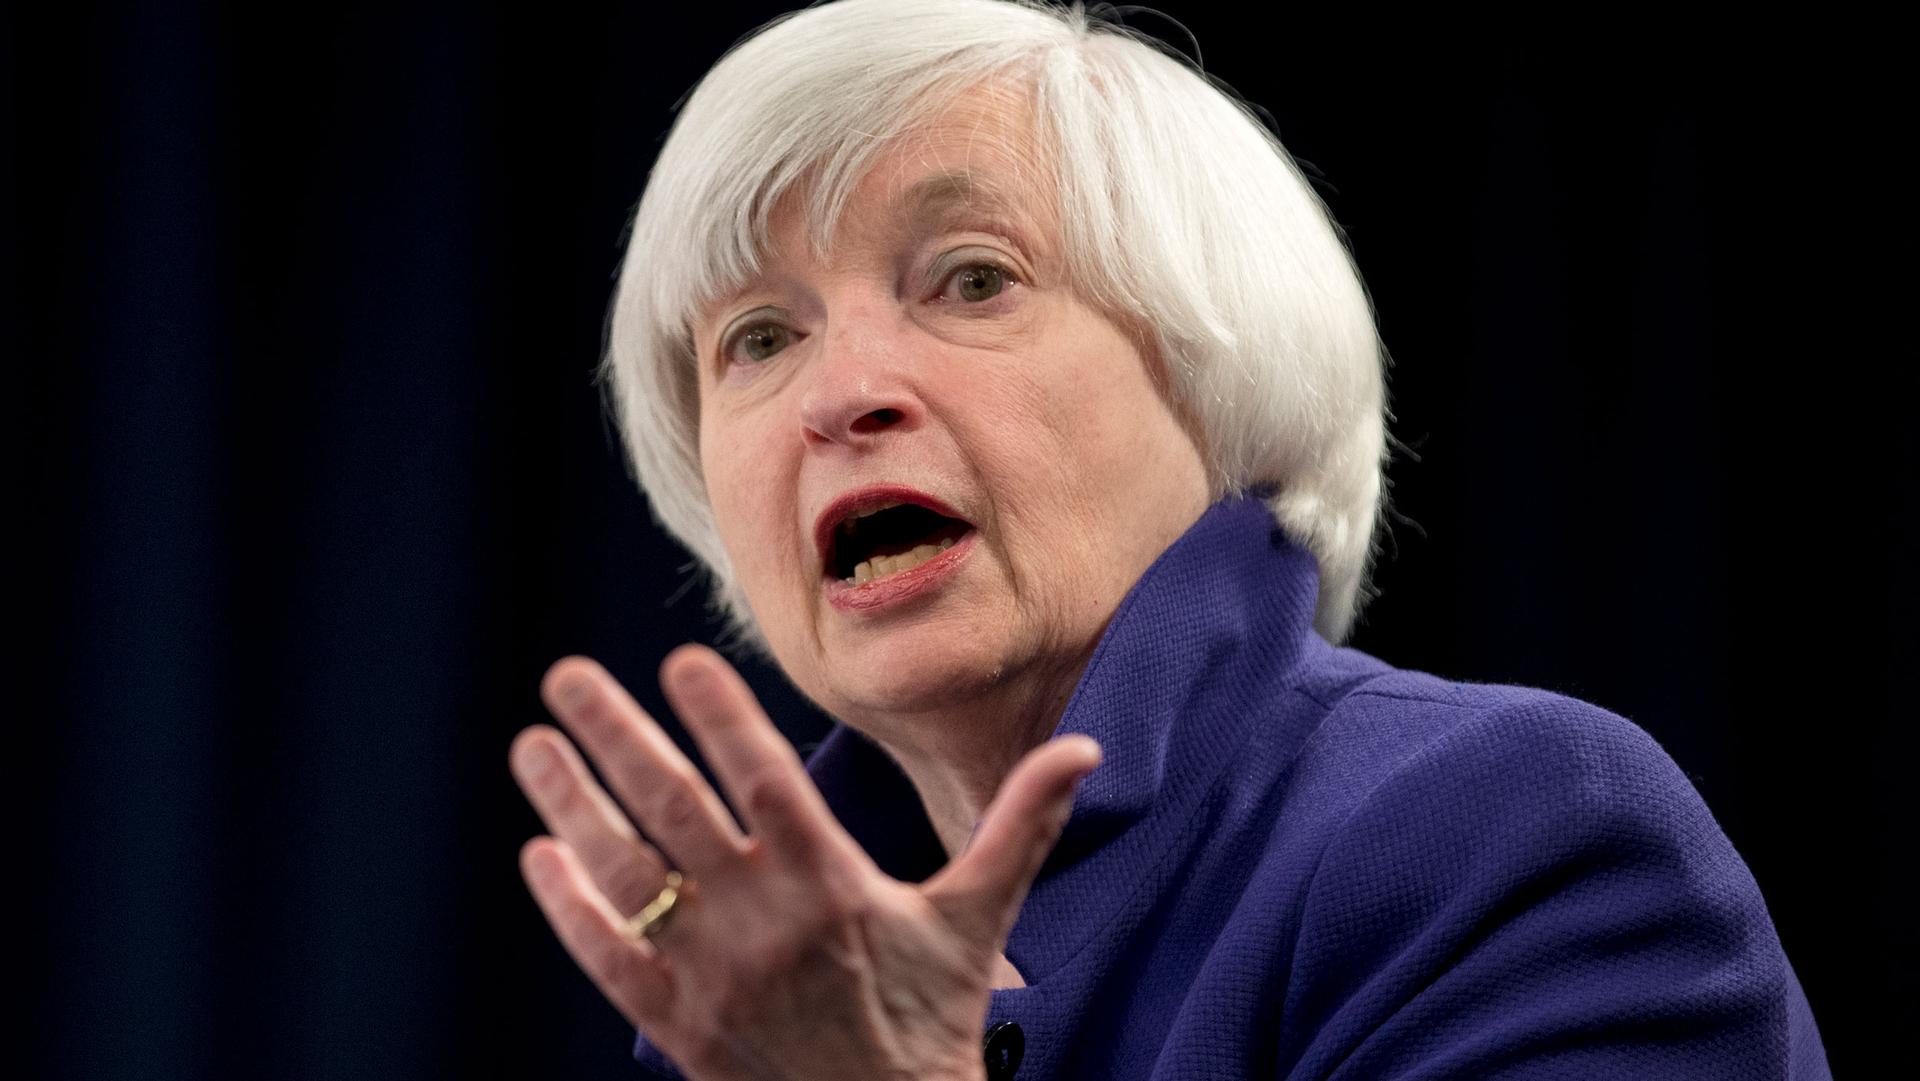 Janet Yellen is shown in a close up photograph speaking with her left hand raised palm up.